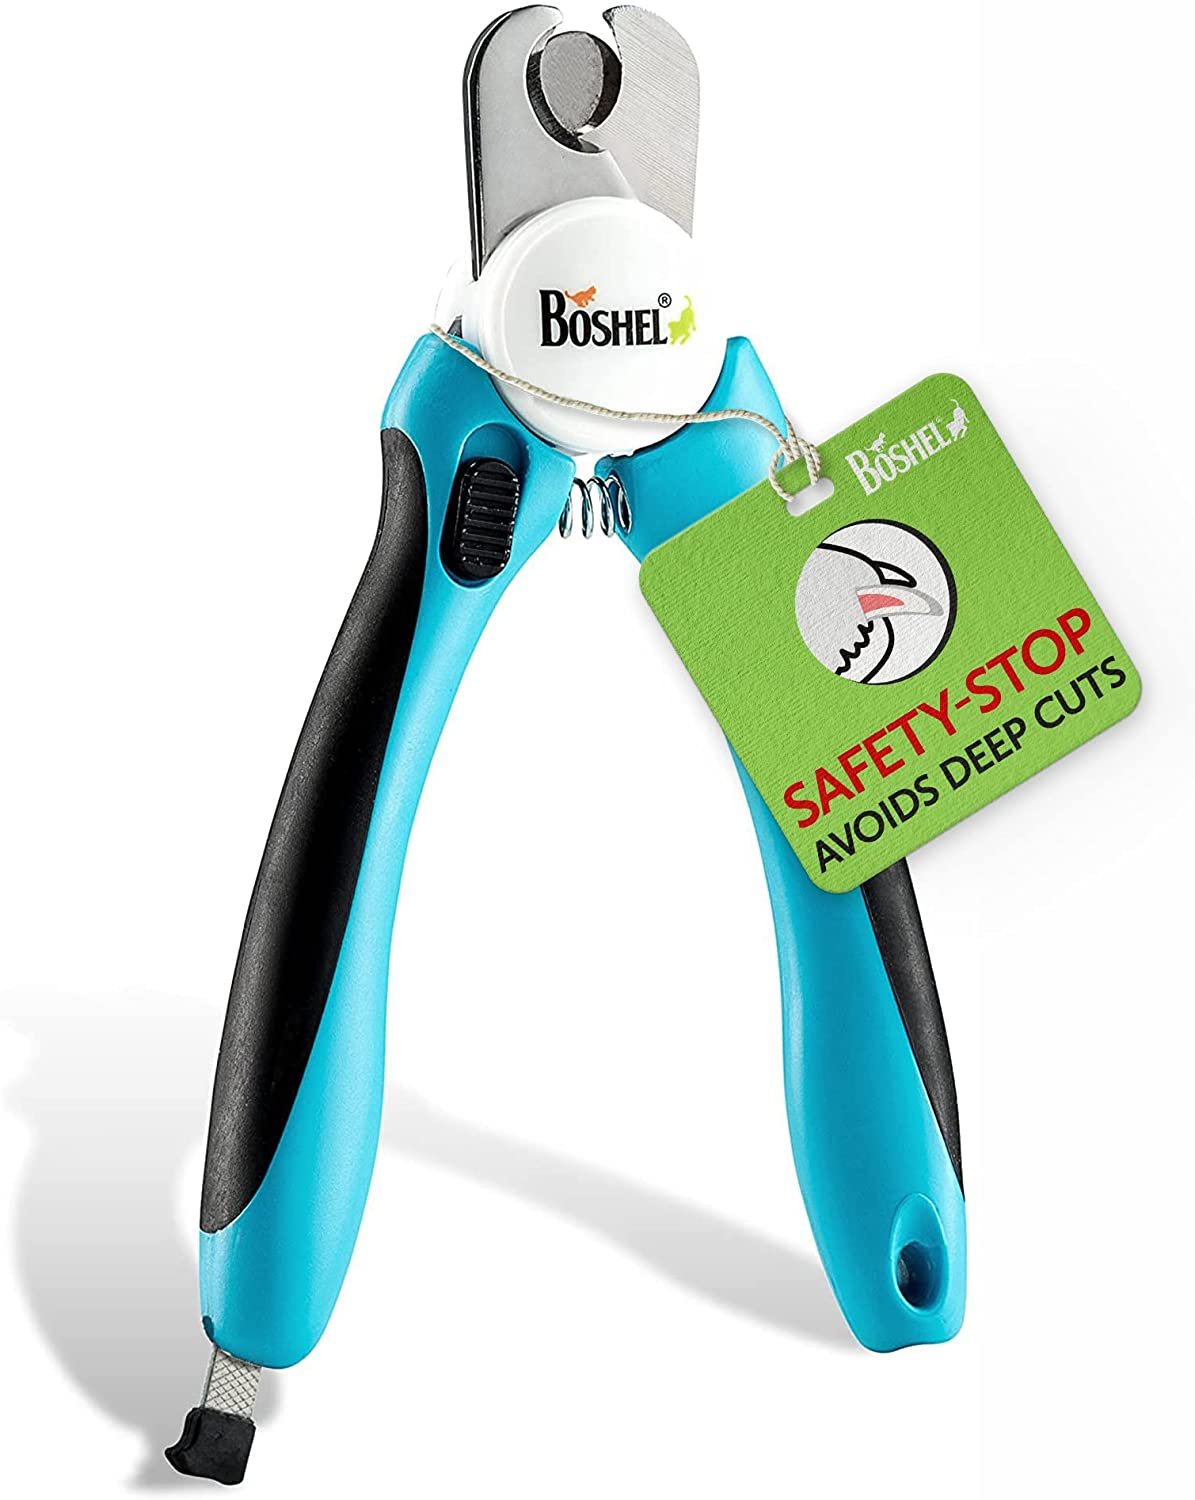 Groom Professional Guillotine Nail Clipper-us